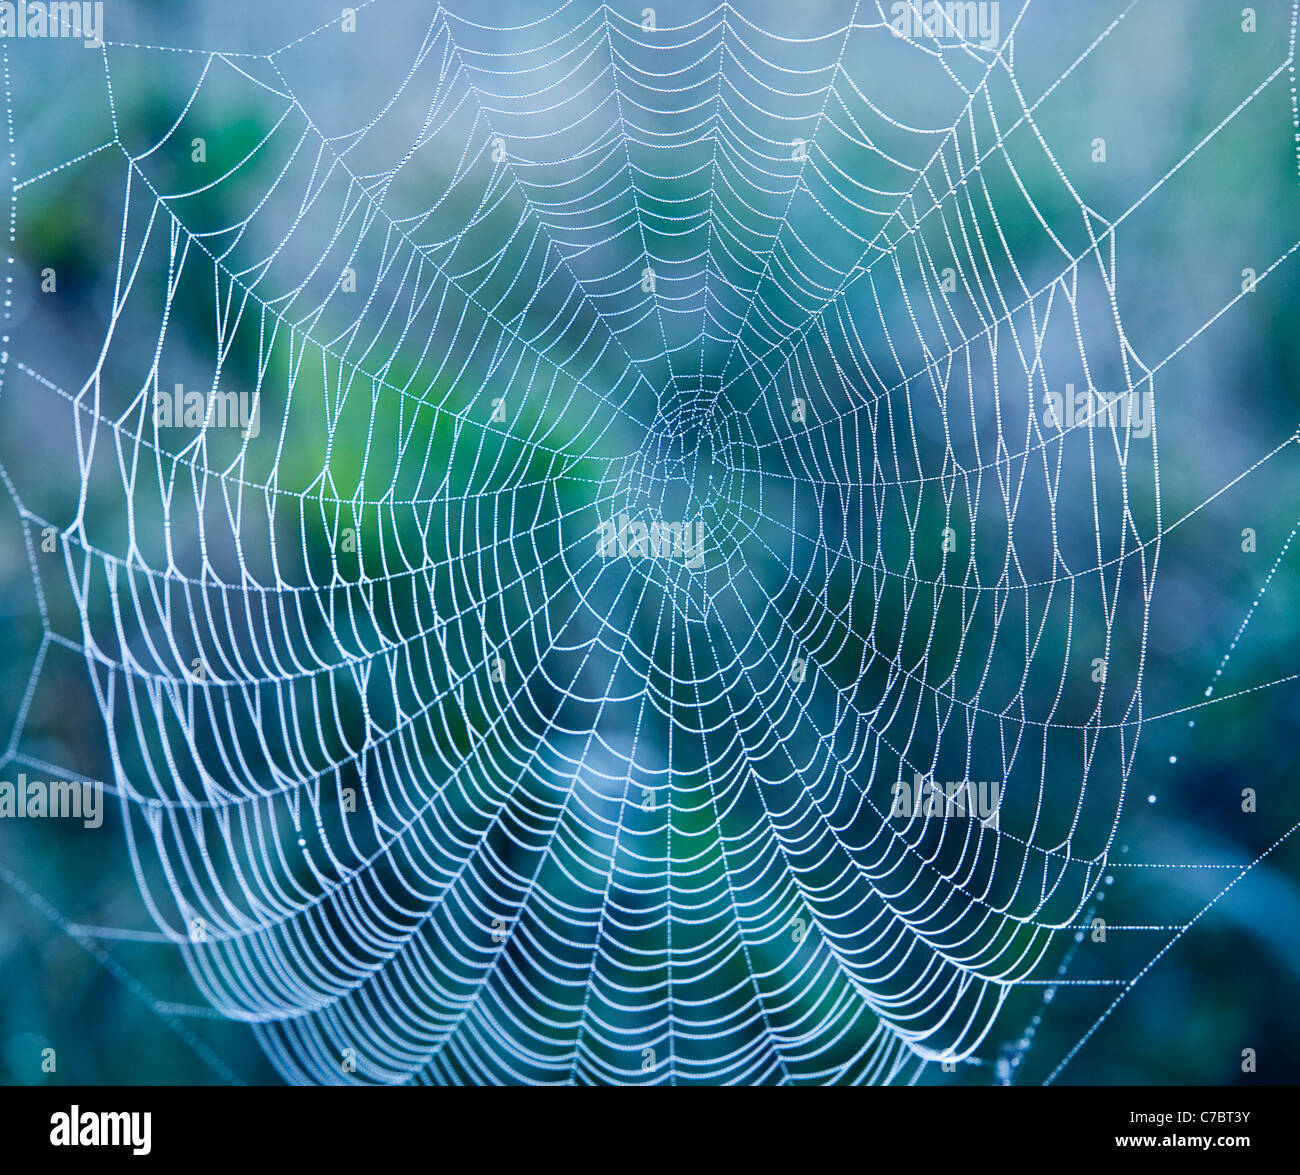 closeup of spider web with dew drops in the morning Stock Photo